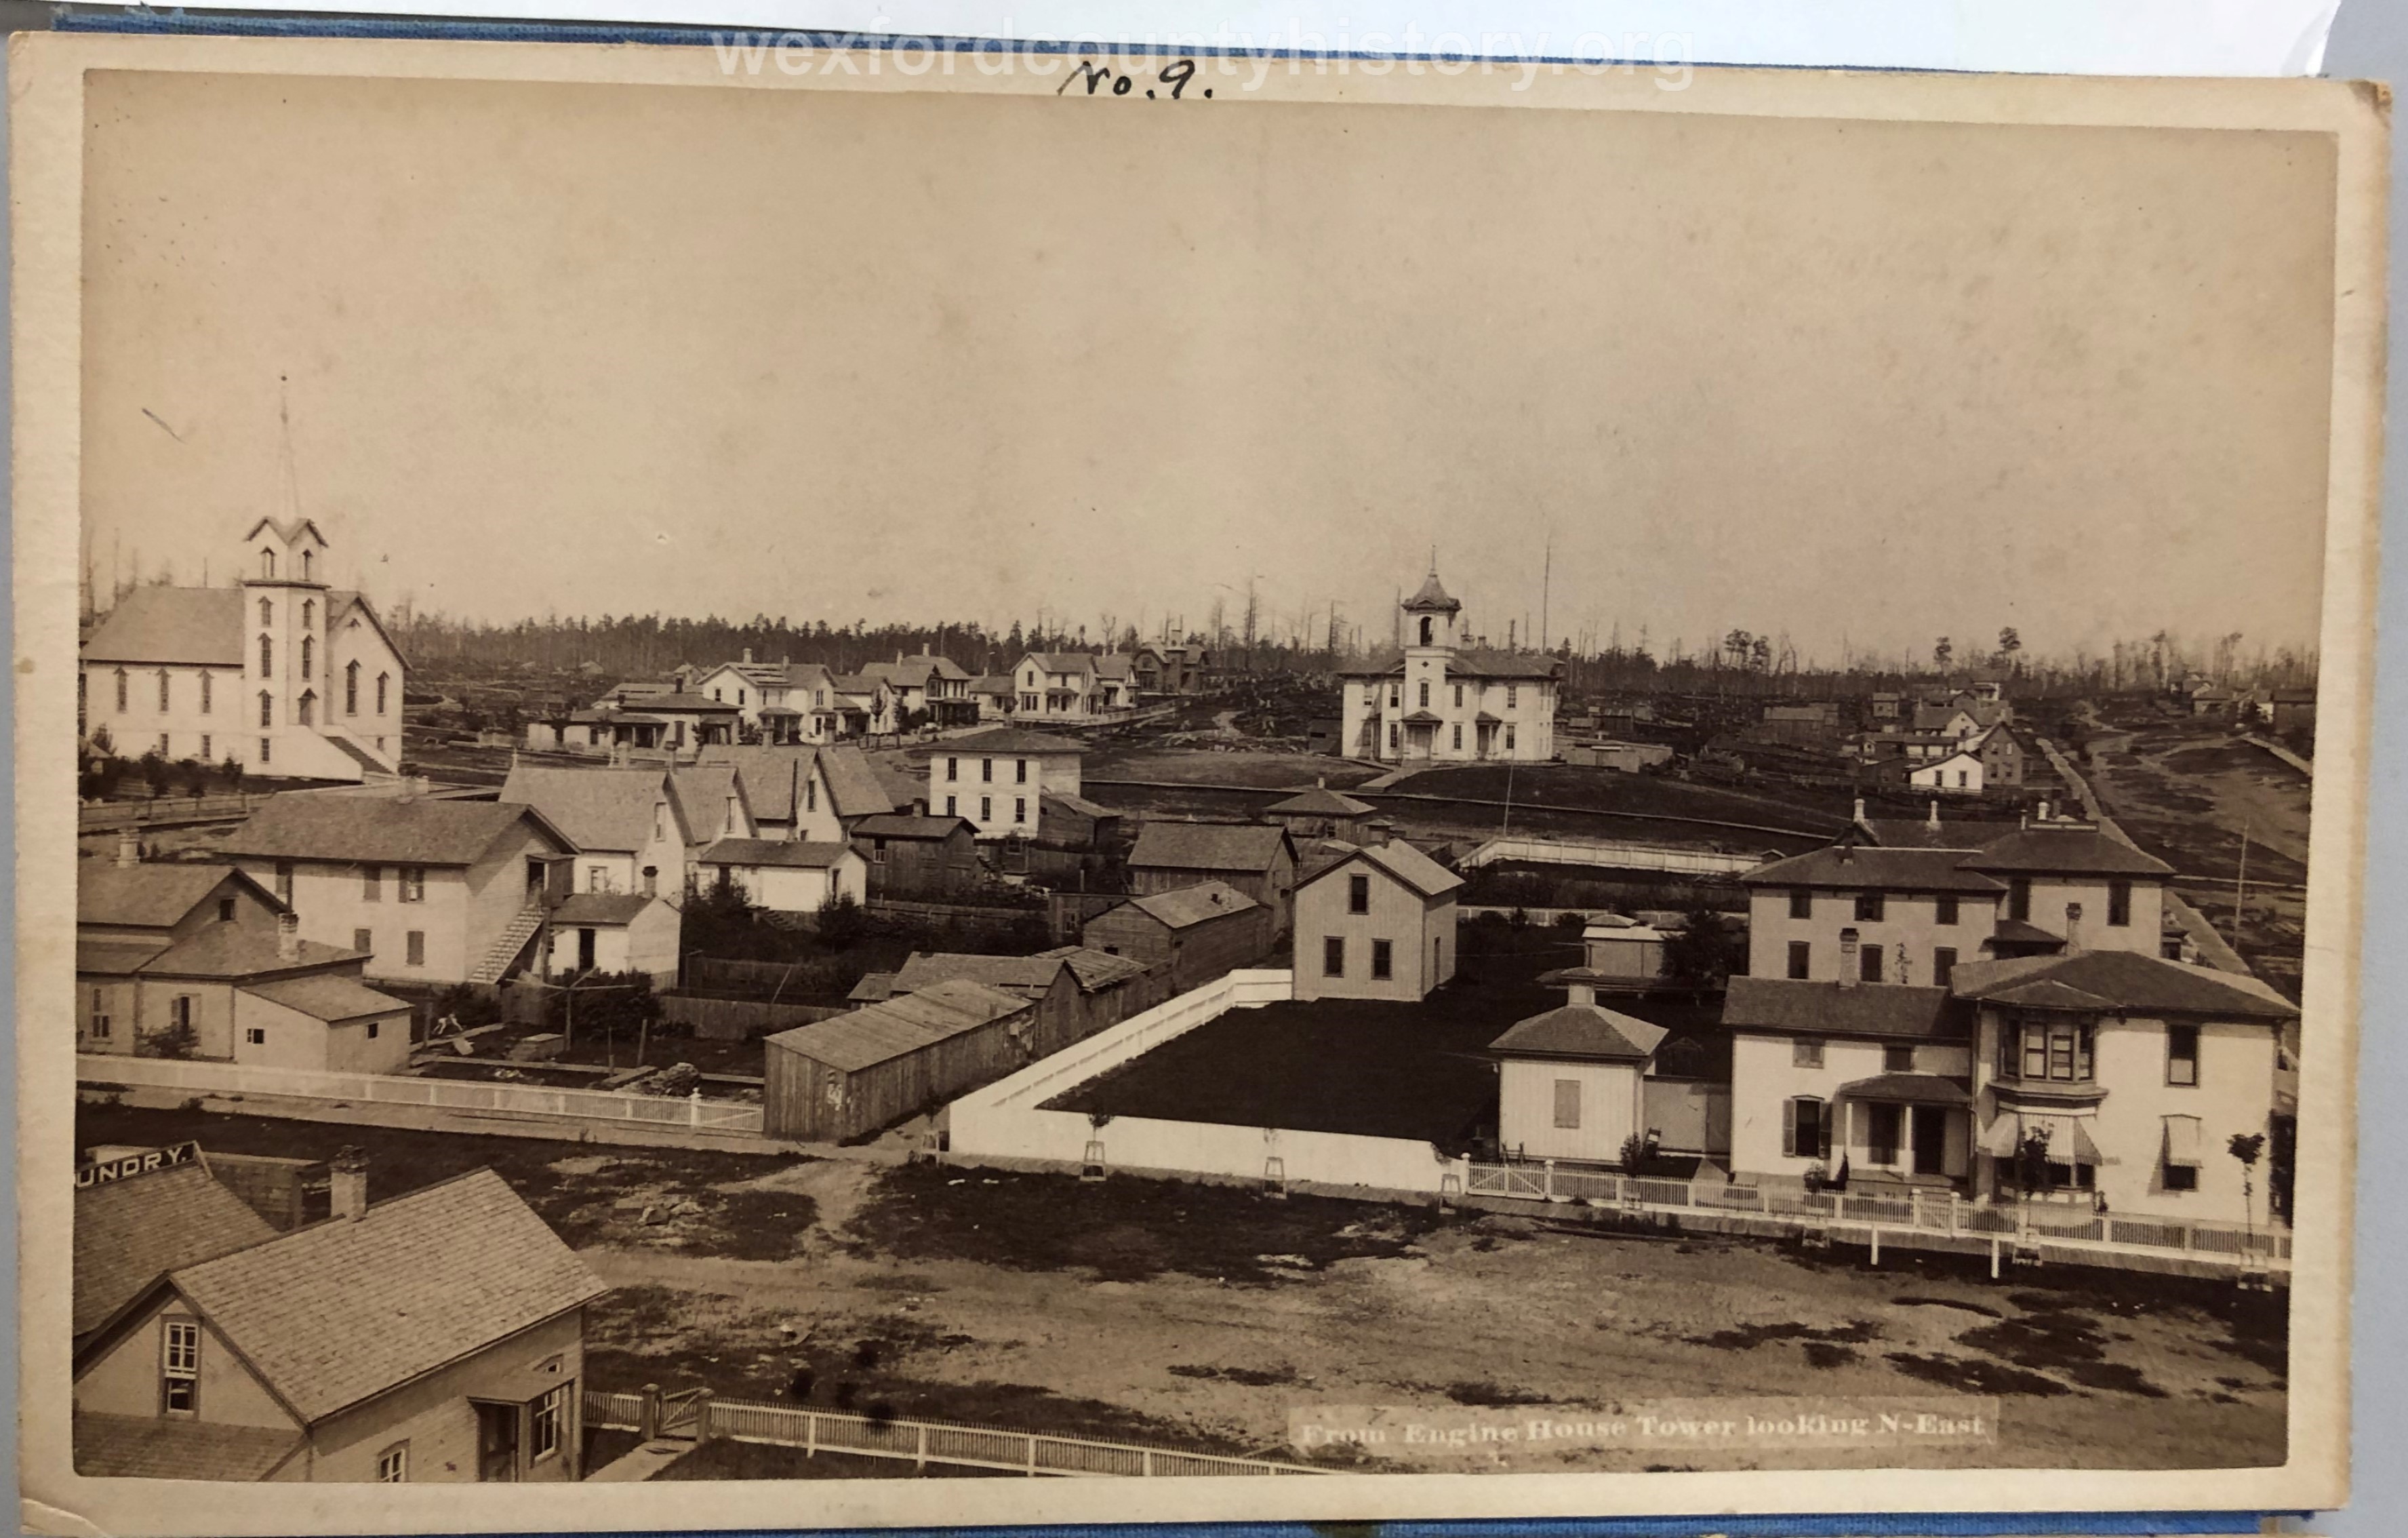 View From Hose Tower Looking North, c. 1882